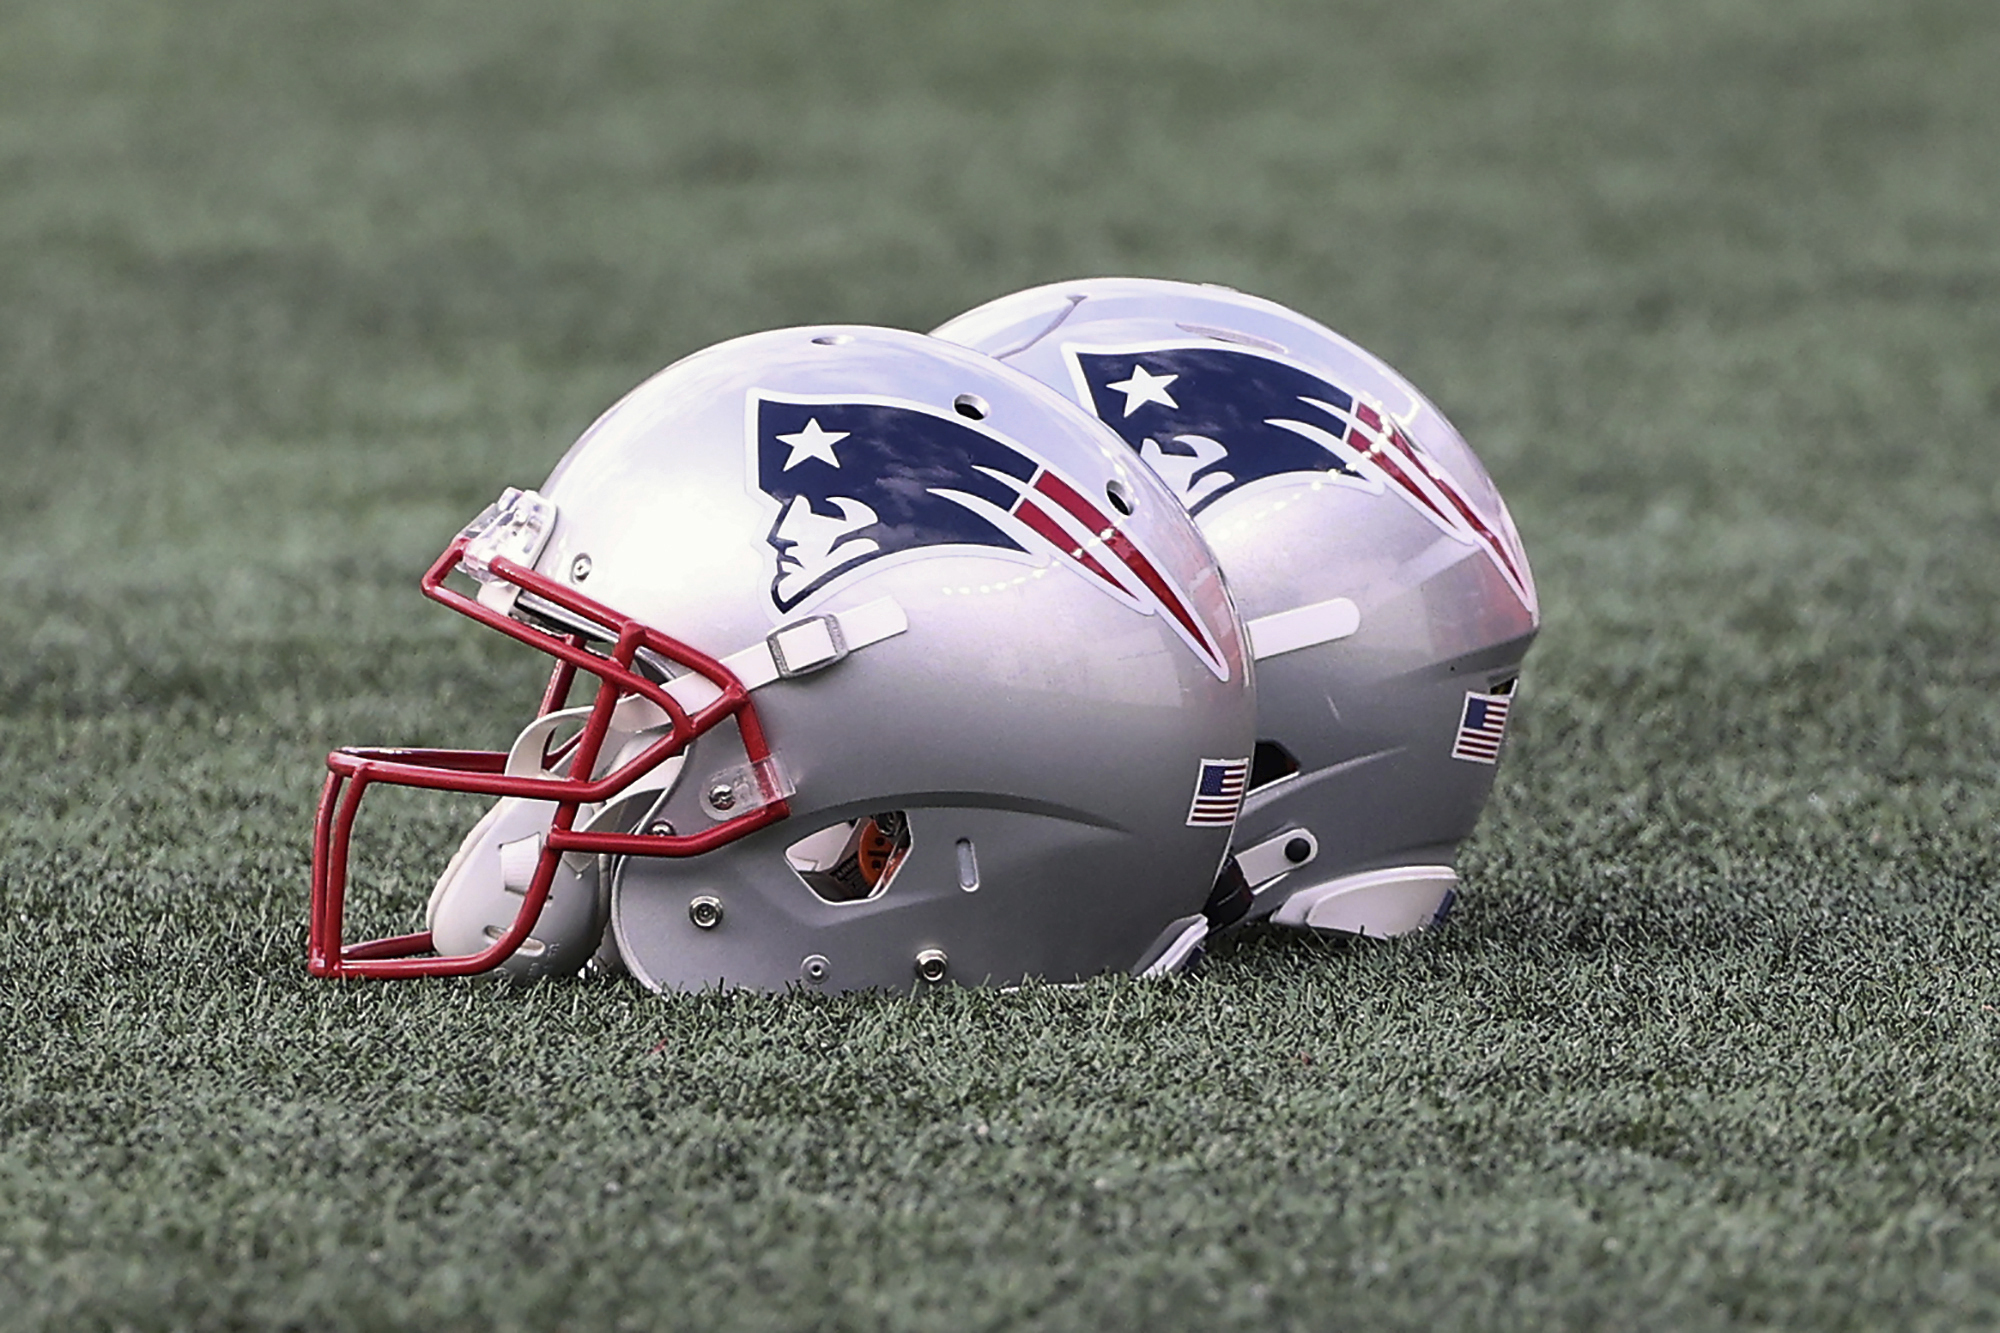 Patriots vs. Eagles: Free stream, TV, start time, how to watch